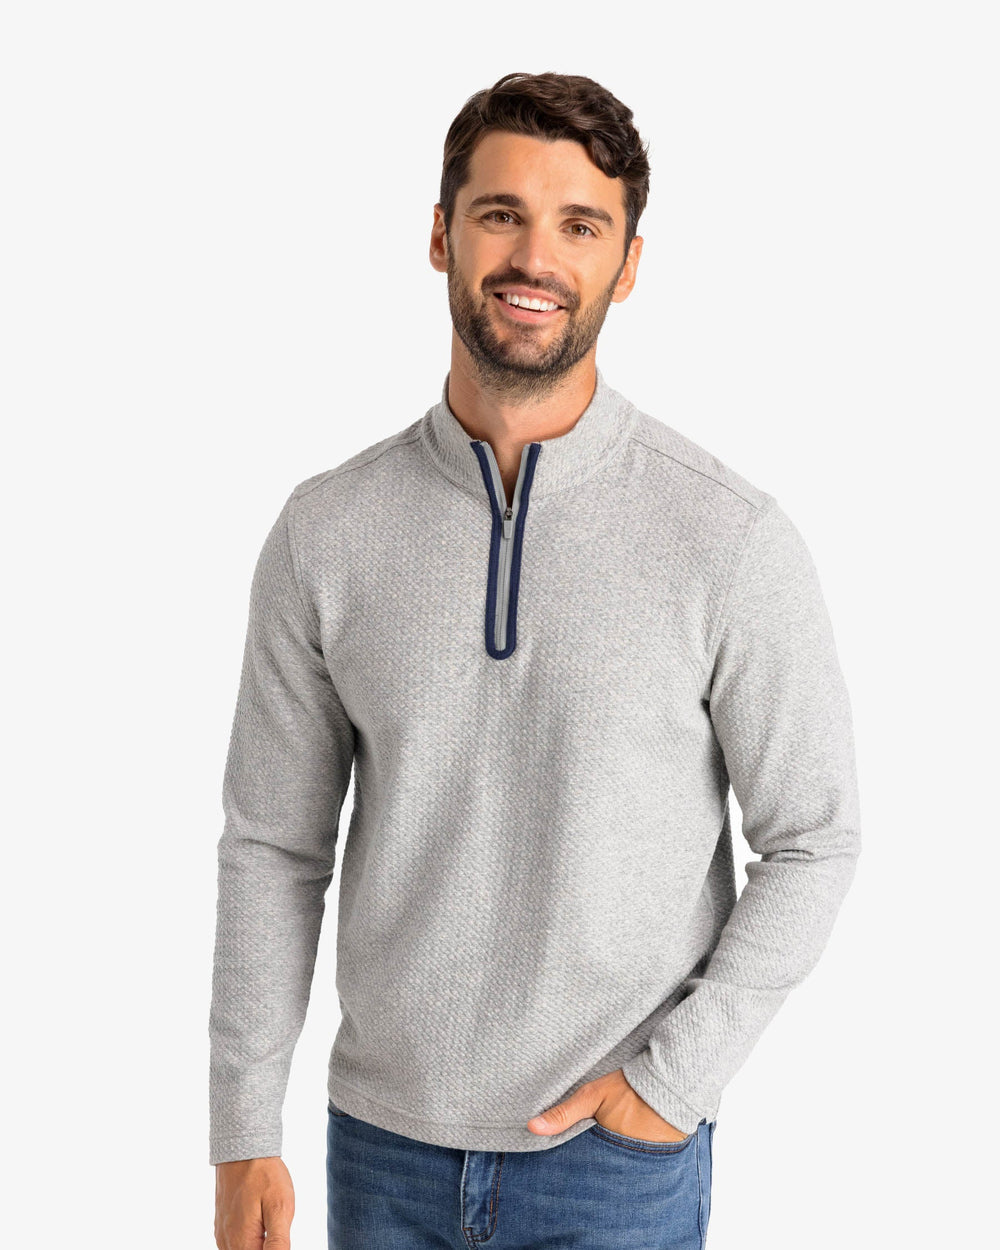 The front view of the Outbound Quarter Zip Pullover by Southern Tide - Heather Mid Grey